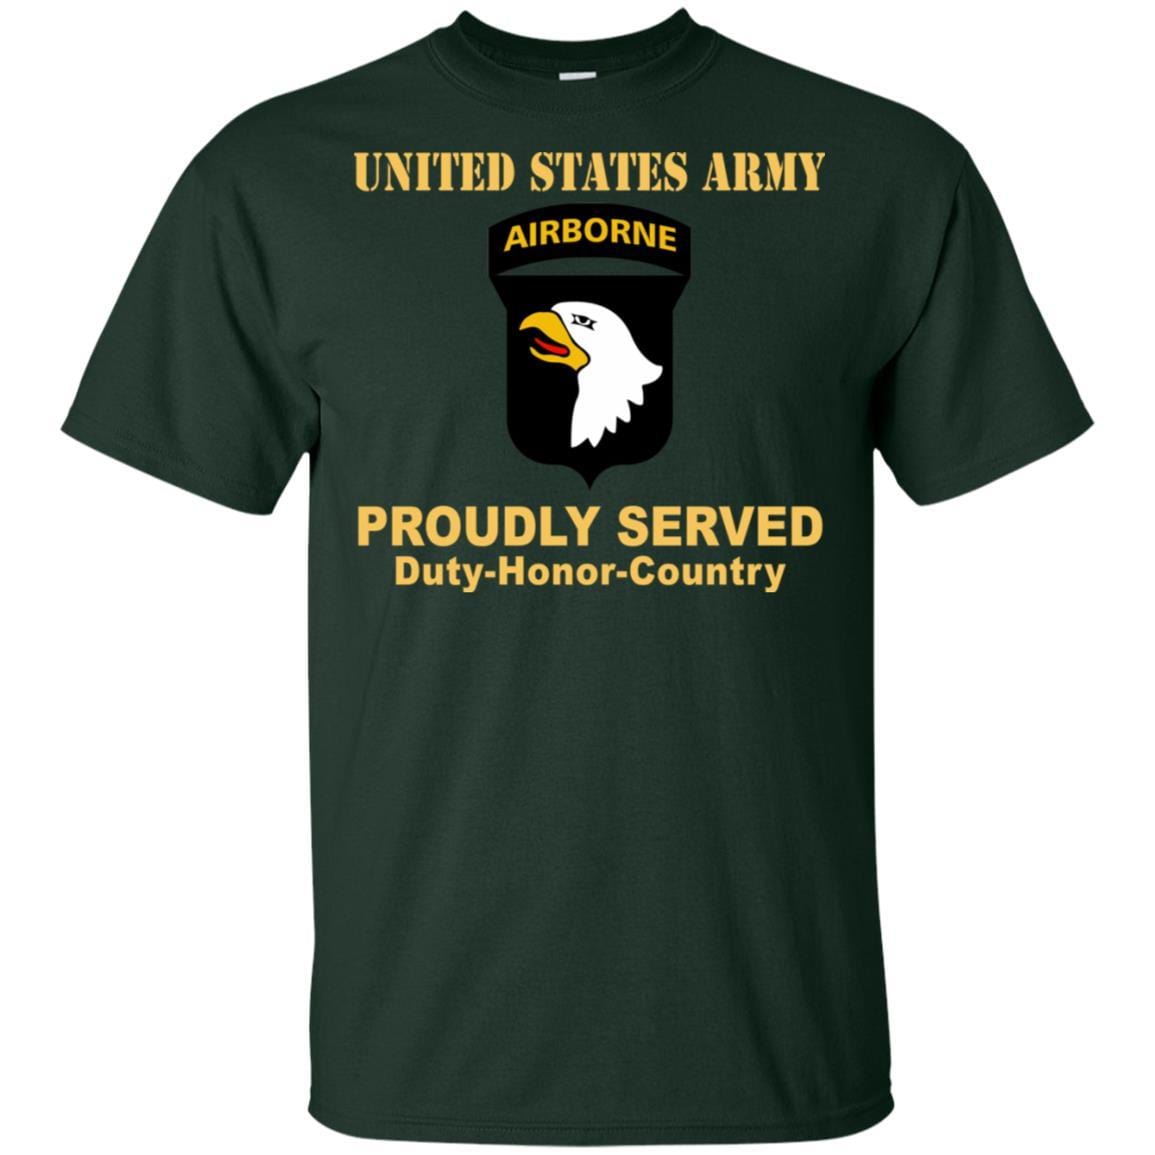 US ARMY 101ST AIRBORNE DIVISION - Proudly Served T-Shirt On Front For Men-TShirt-Army-Veterans Nation